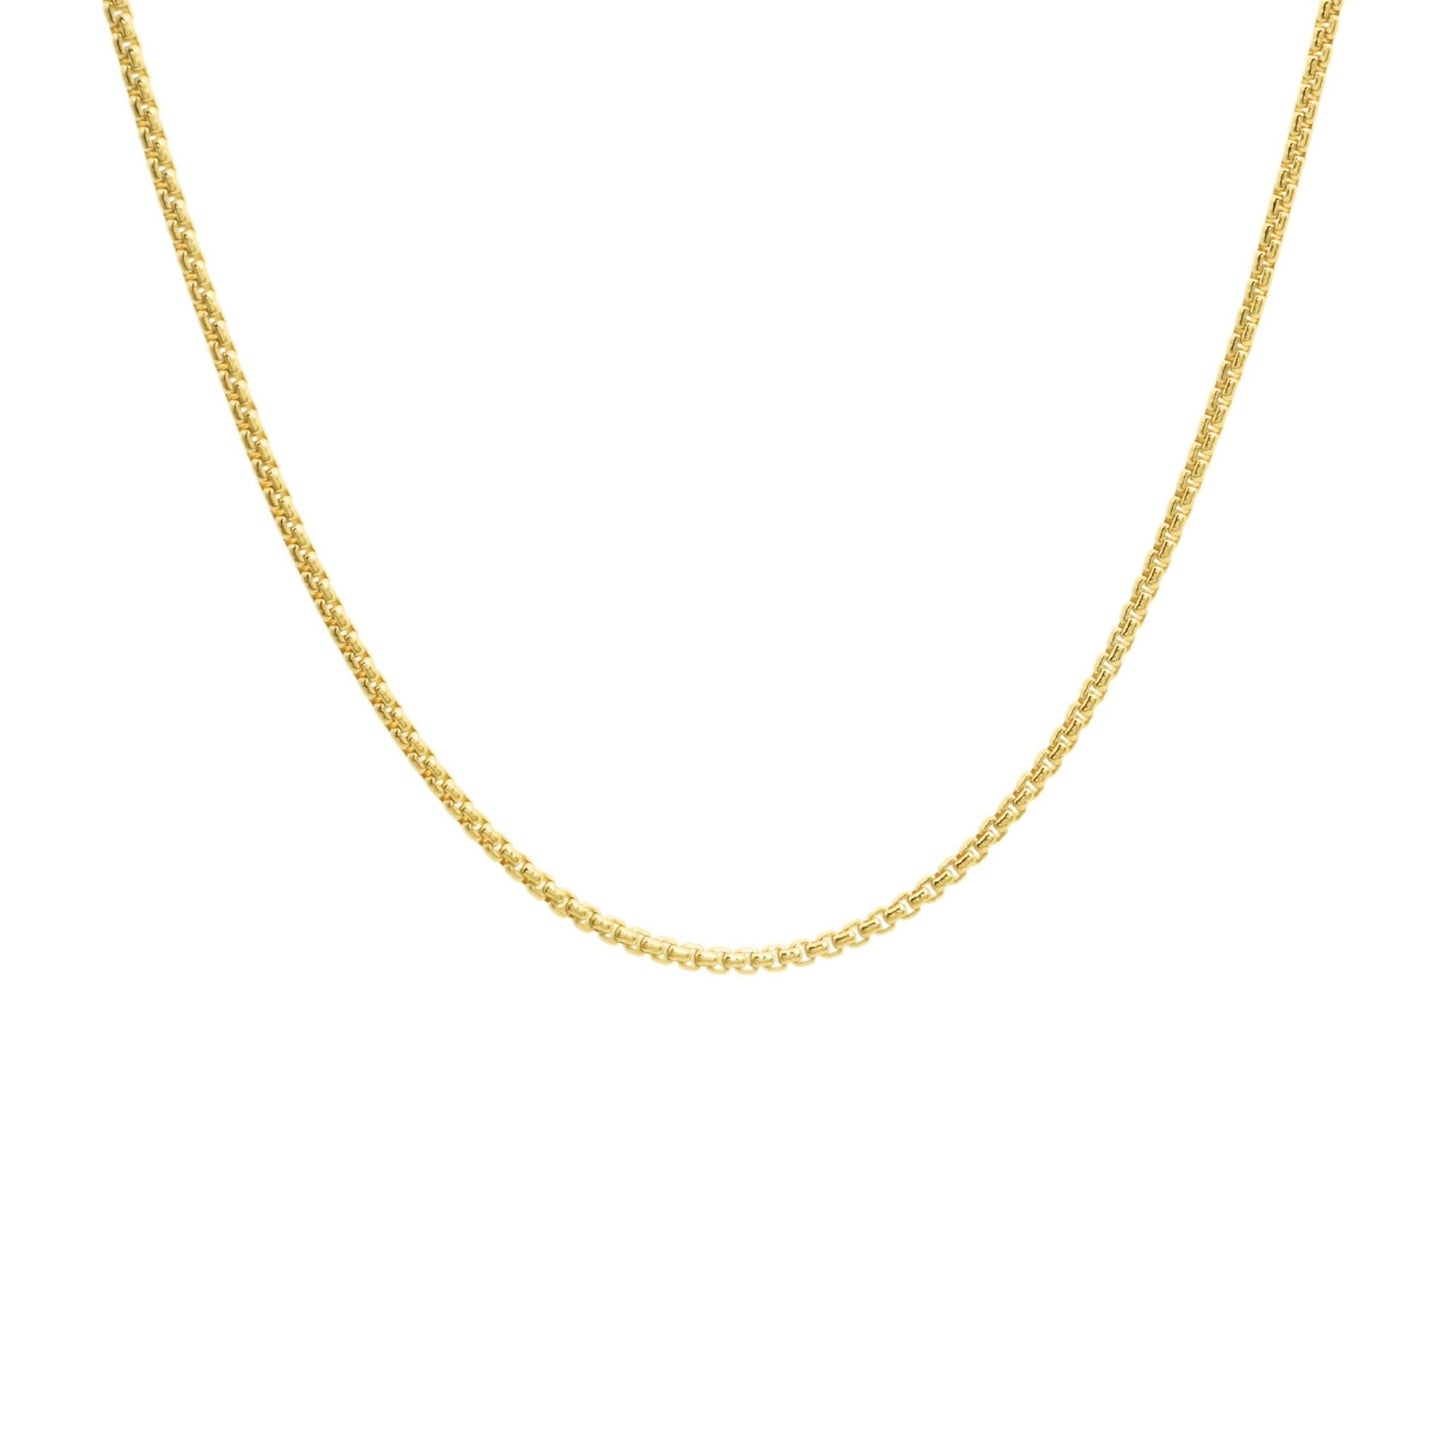 Necklace - Modern Box Chain 14k Gold-filled Necklace - 1